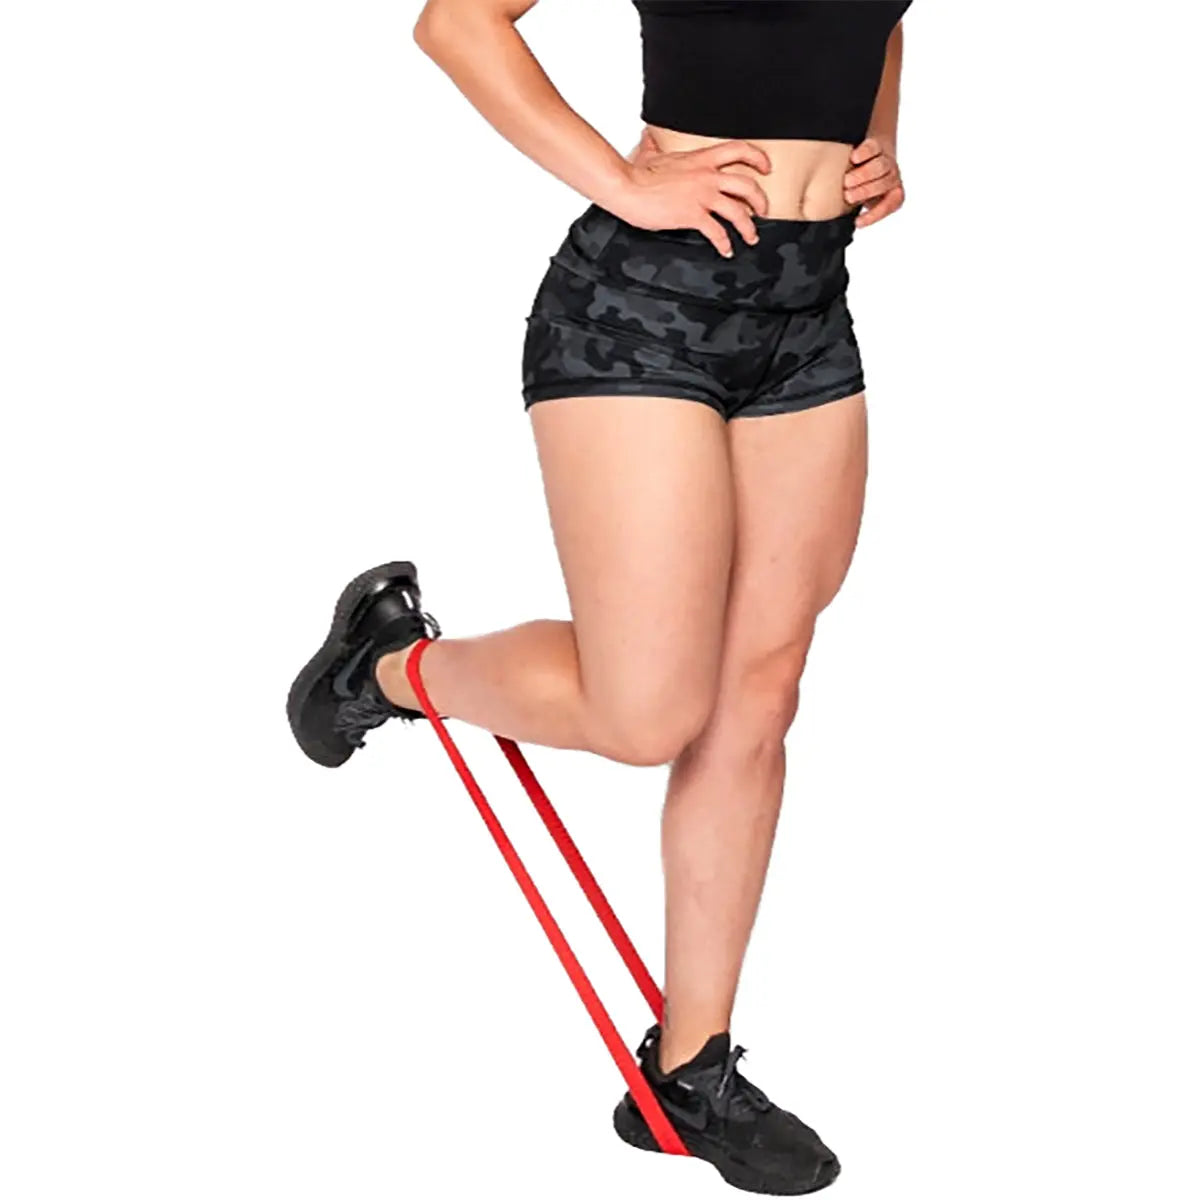 Sling Shot Hip Circle Mobility Resistance Bands - 3-Pack – Forza